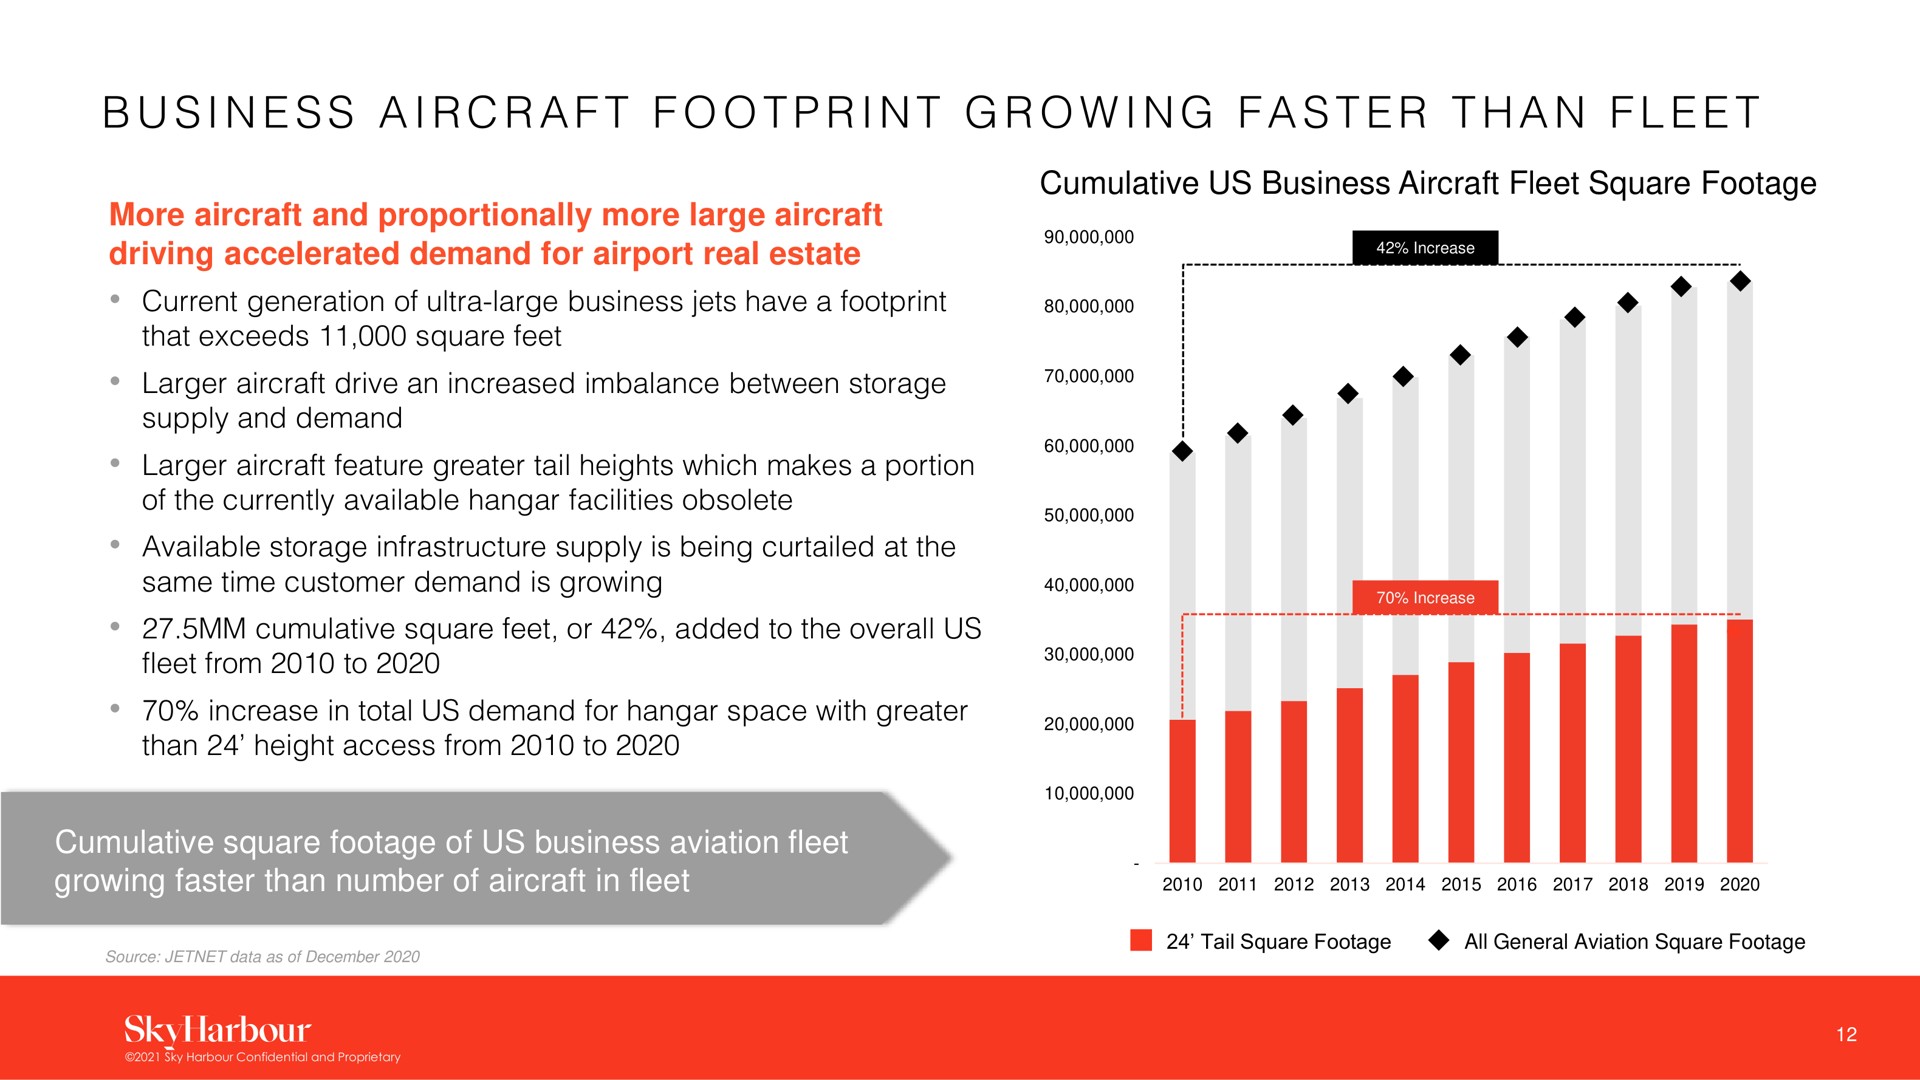 i a i a i i a a business aircraft footprint growing faster than fleet | SkyHarbour